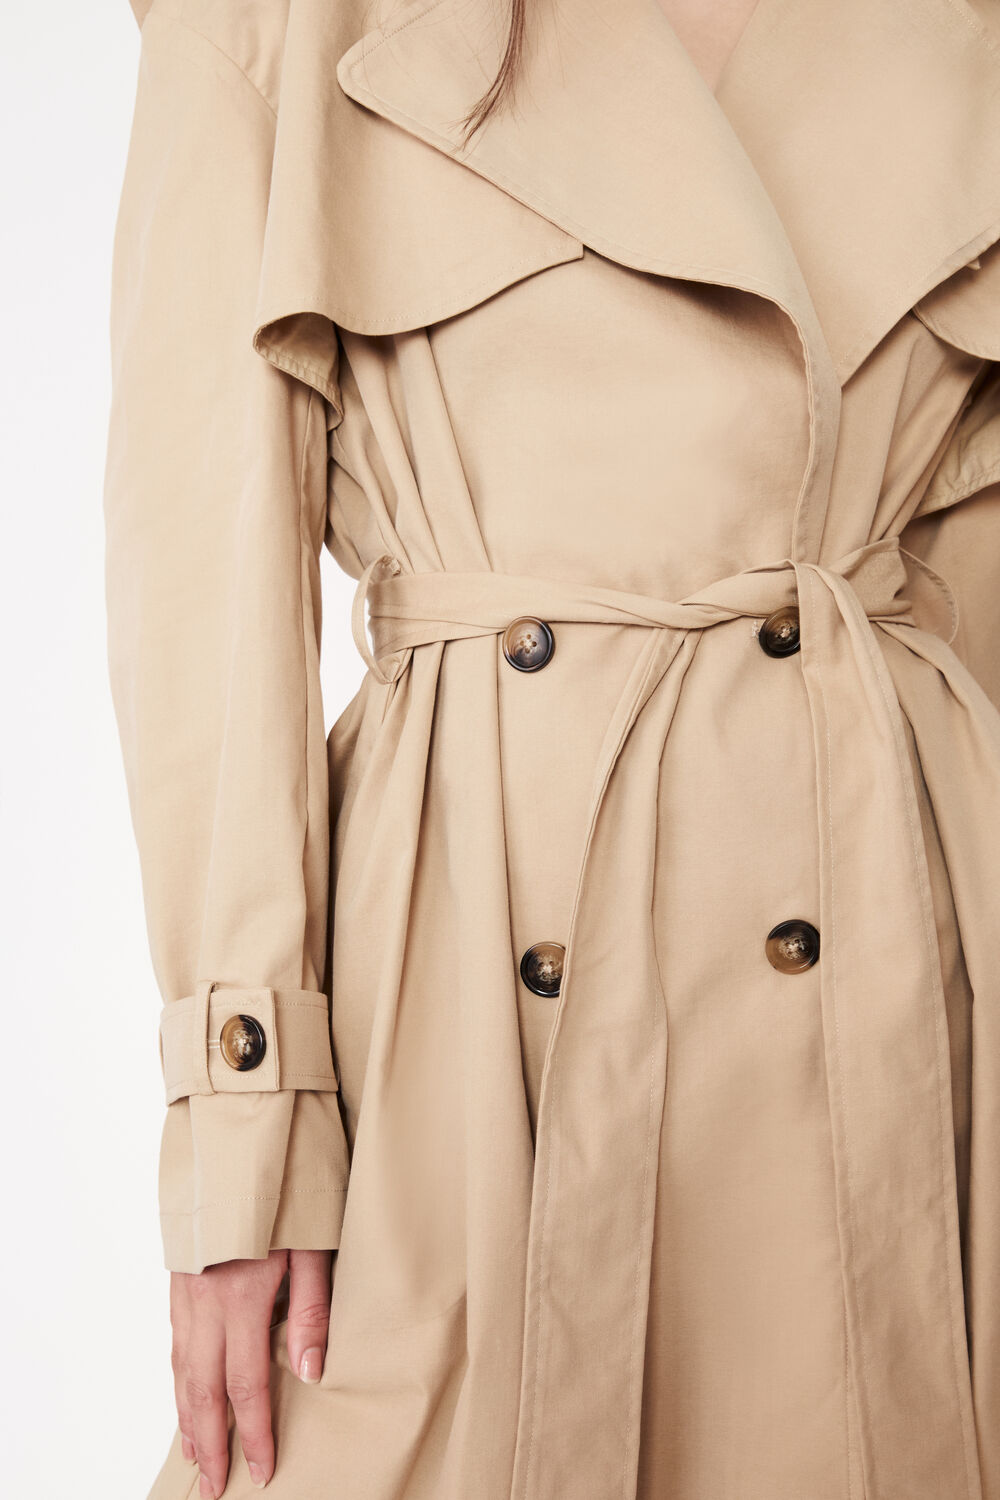 THE OVERSIZED TRENCH in colour TAN